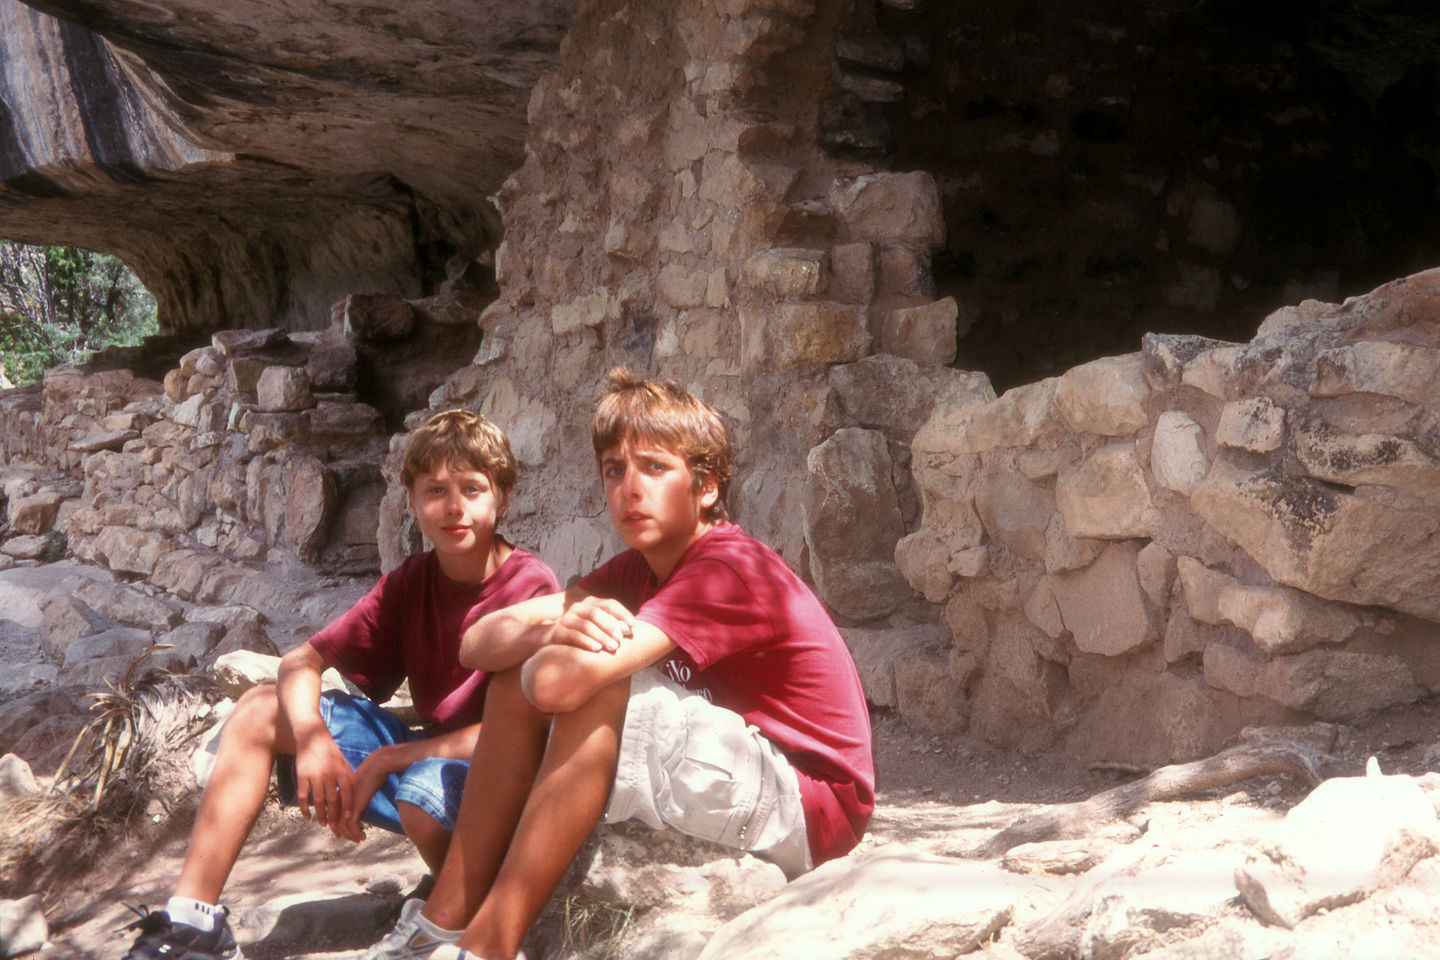 Boys in ancient cliff dwelling